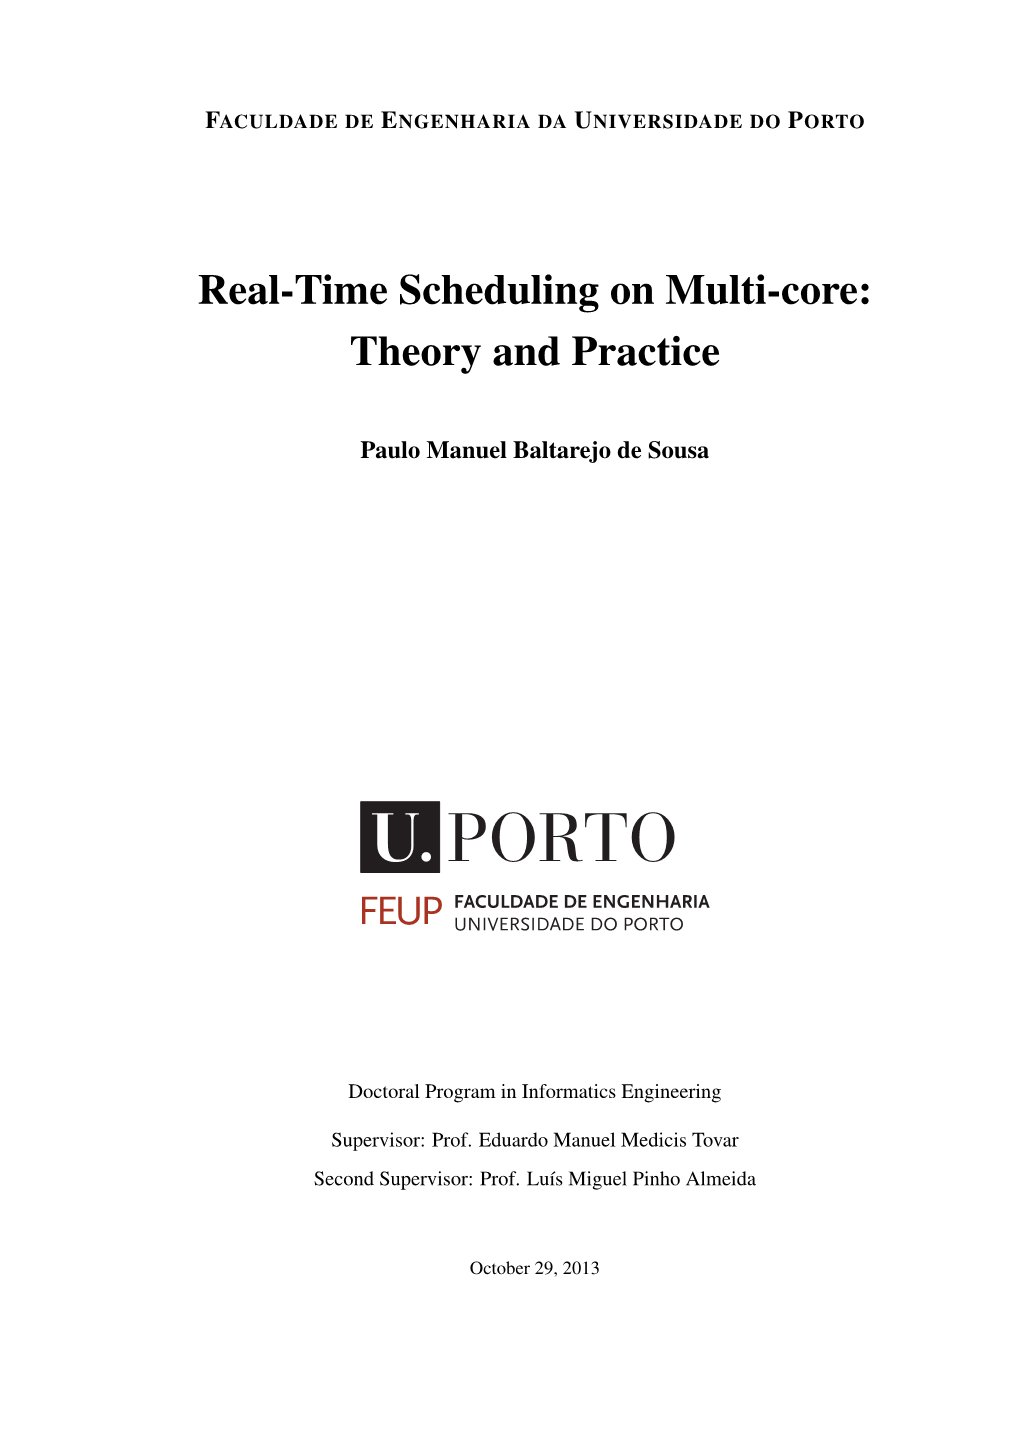 Real-Time Scheduling on Multi-Core: Theory and Practice